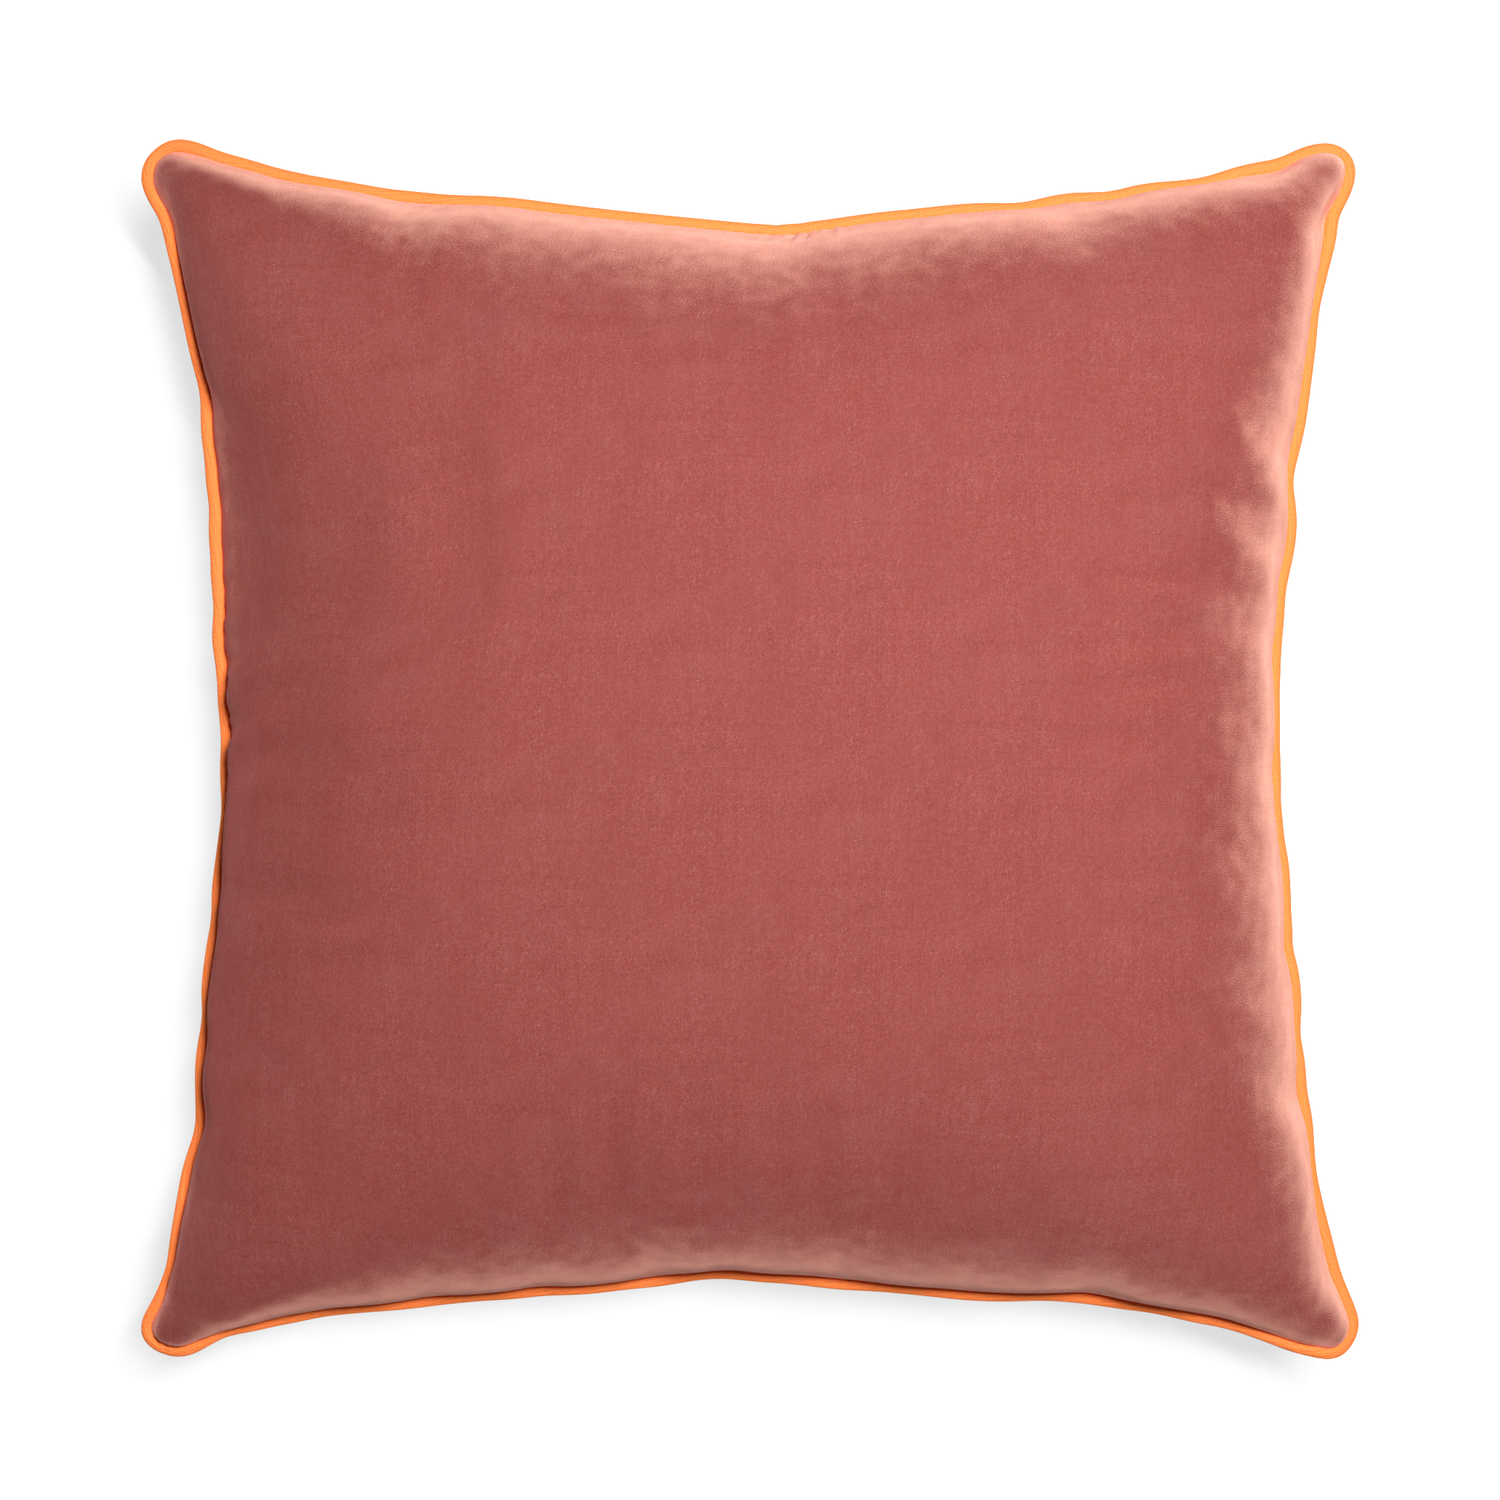 Euro-sham cosmo velvet custom pillow with clementine piping on white background